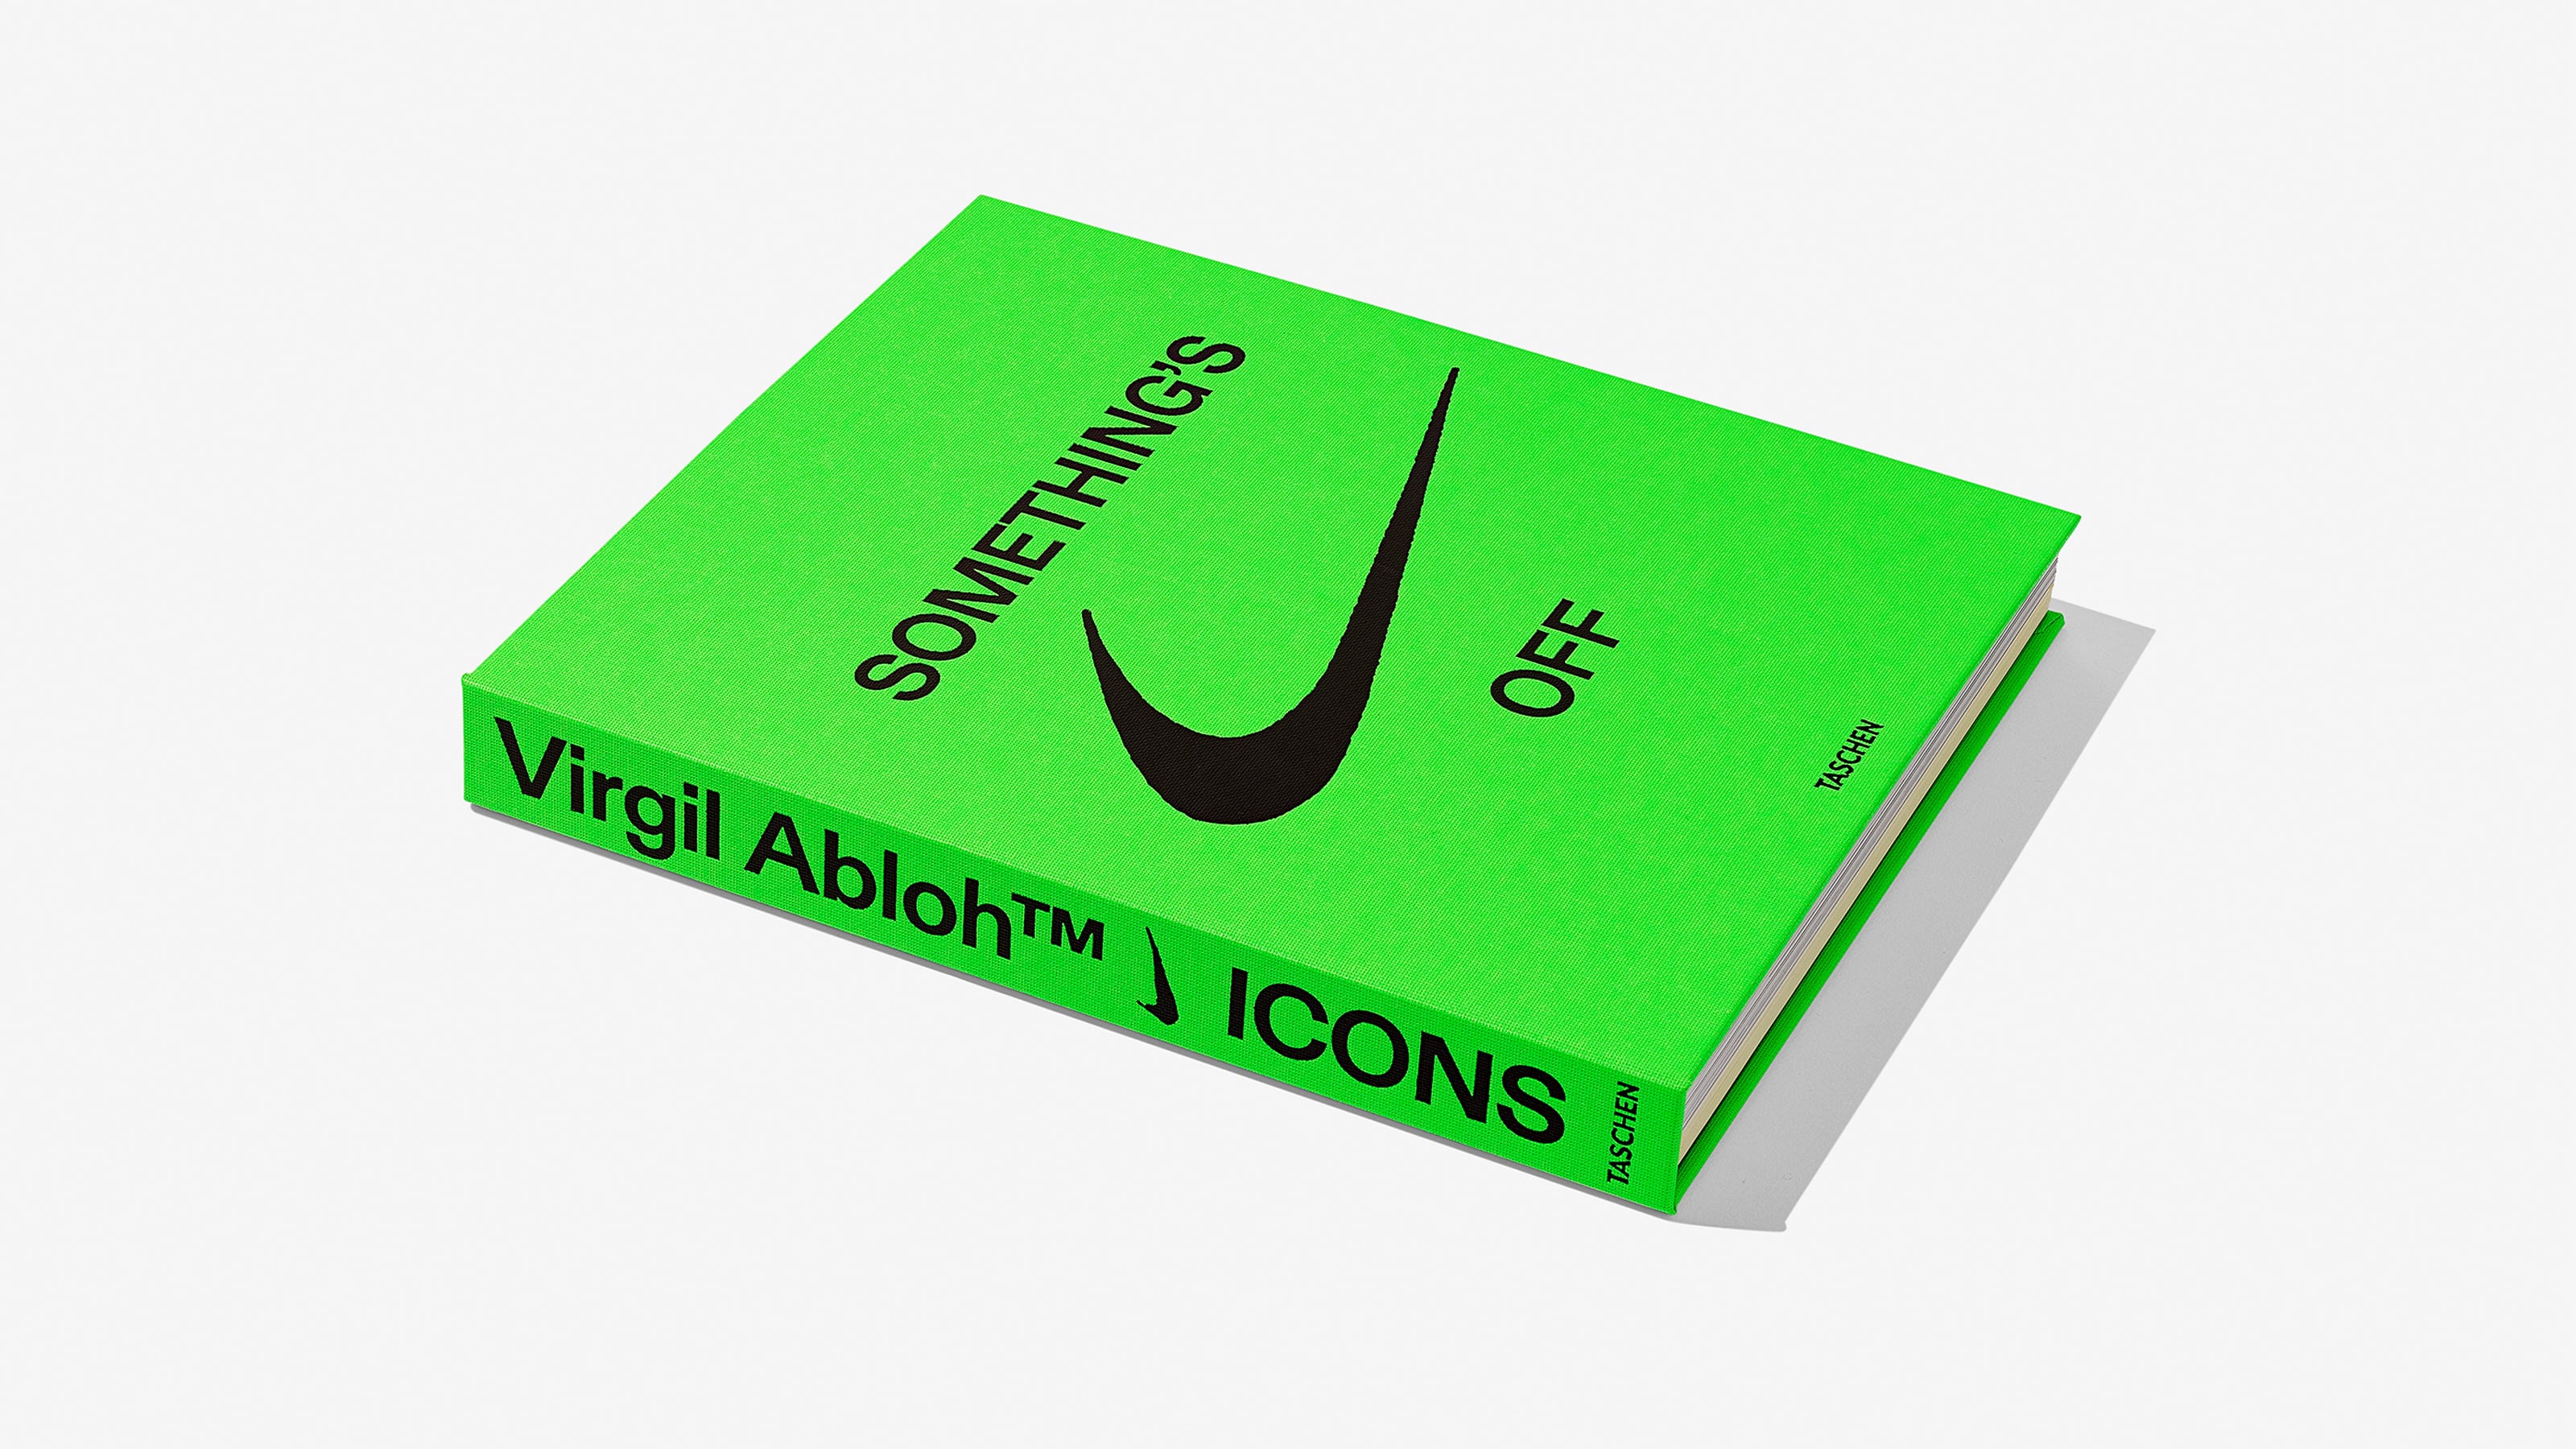 Virgil Abloh and Nike Book ICONS Something's Off